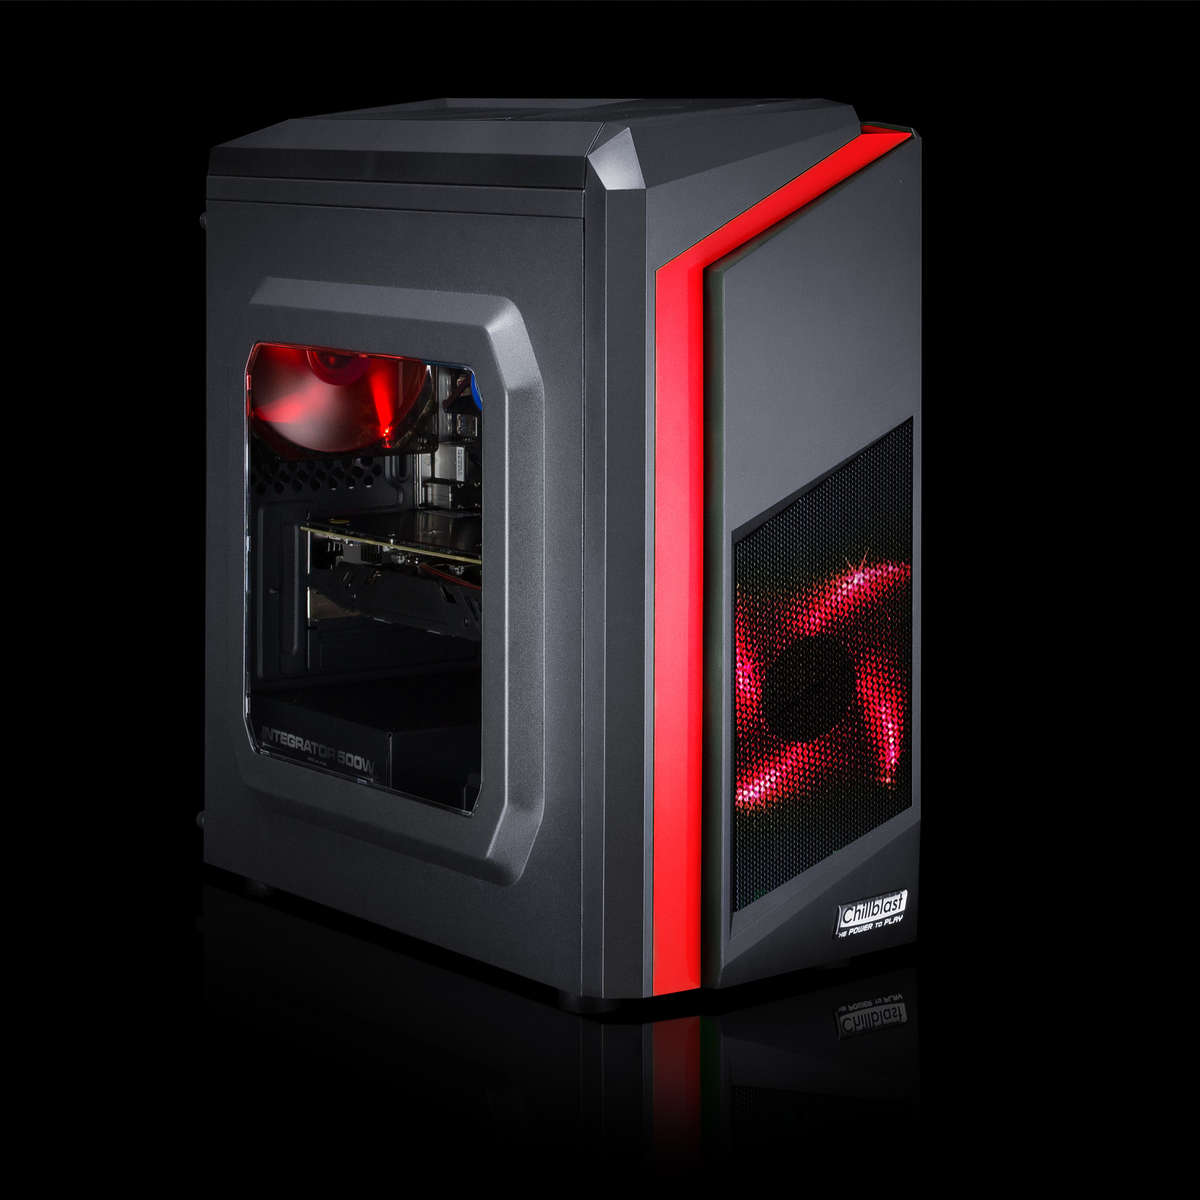 Image of the Chillblast Fusion Imp Gaming PC which has red RGB lighting in its case